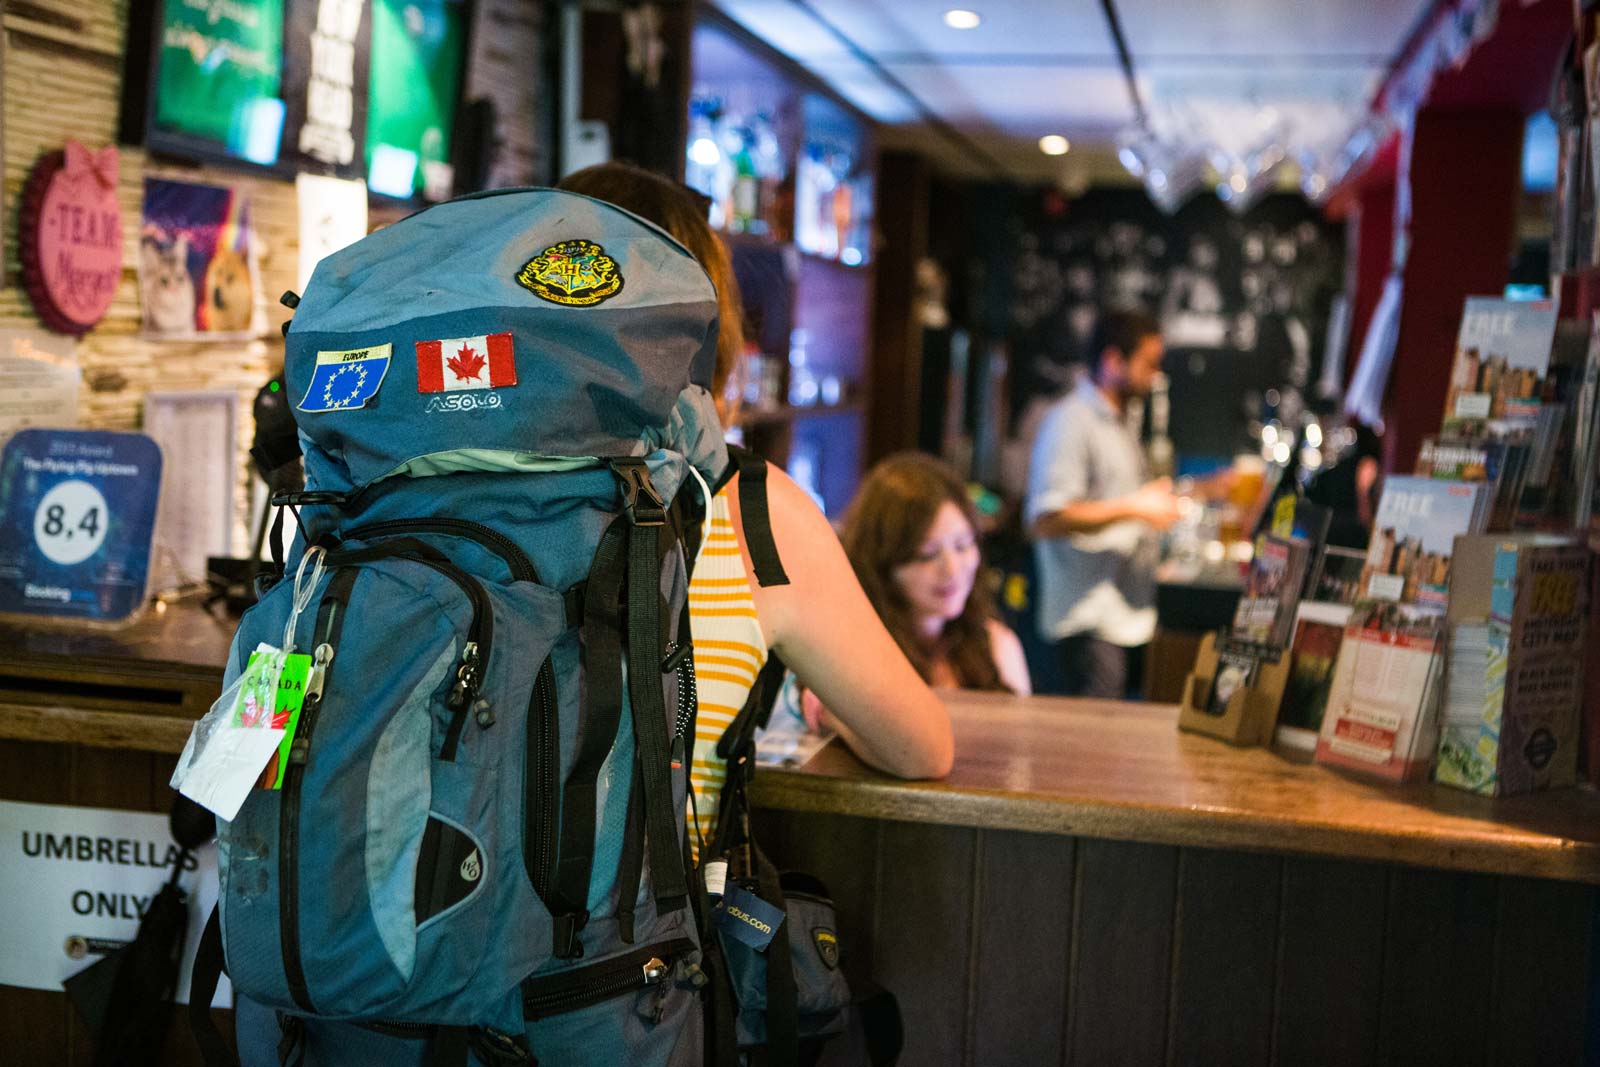 A backpacker checking into the the Flying Pig Uptown hostel.